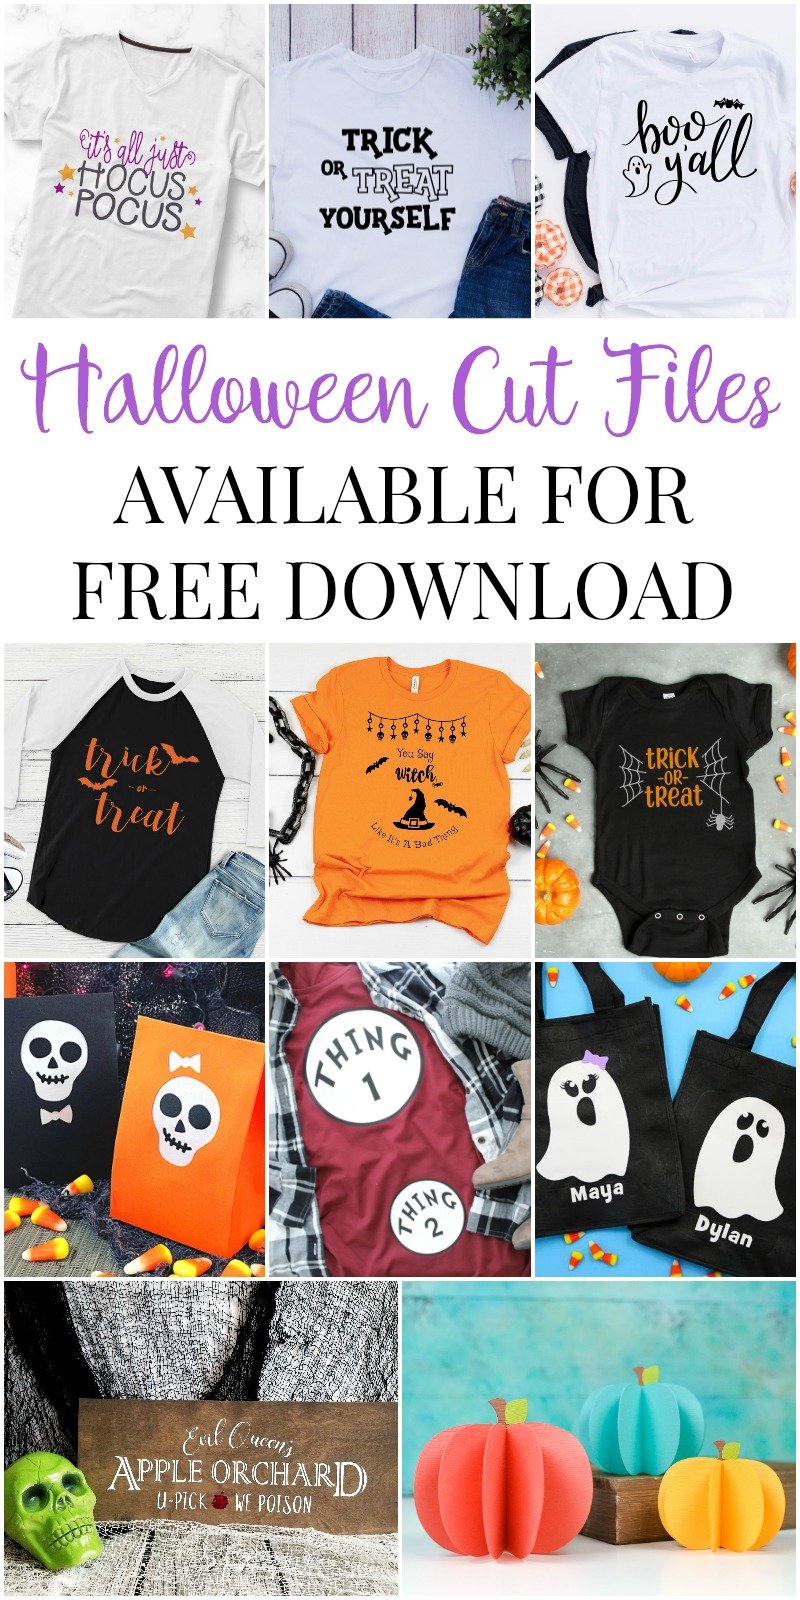 halloween cute files available for free download